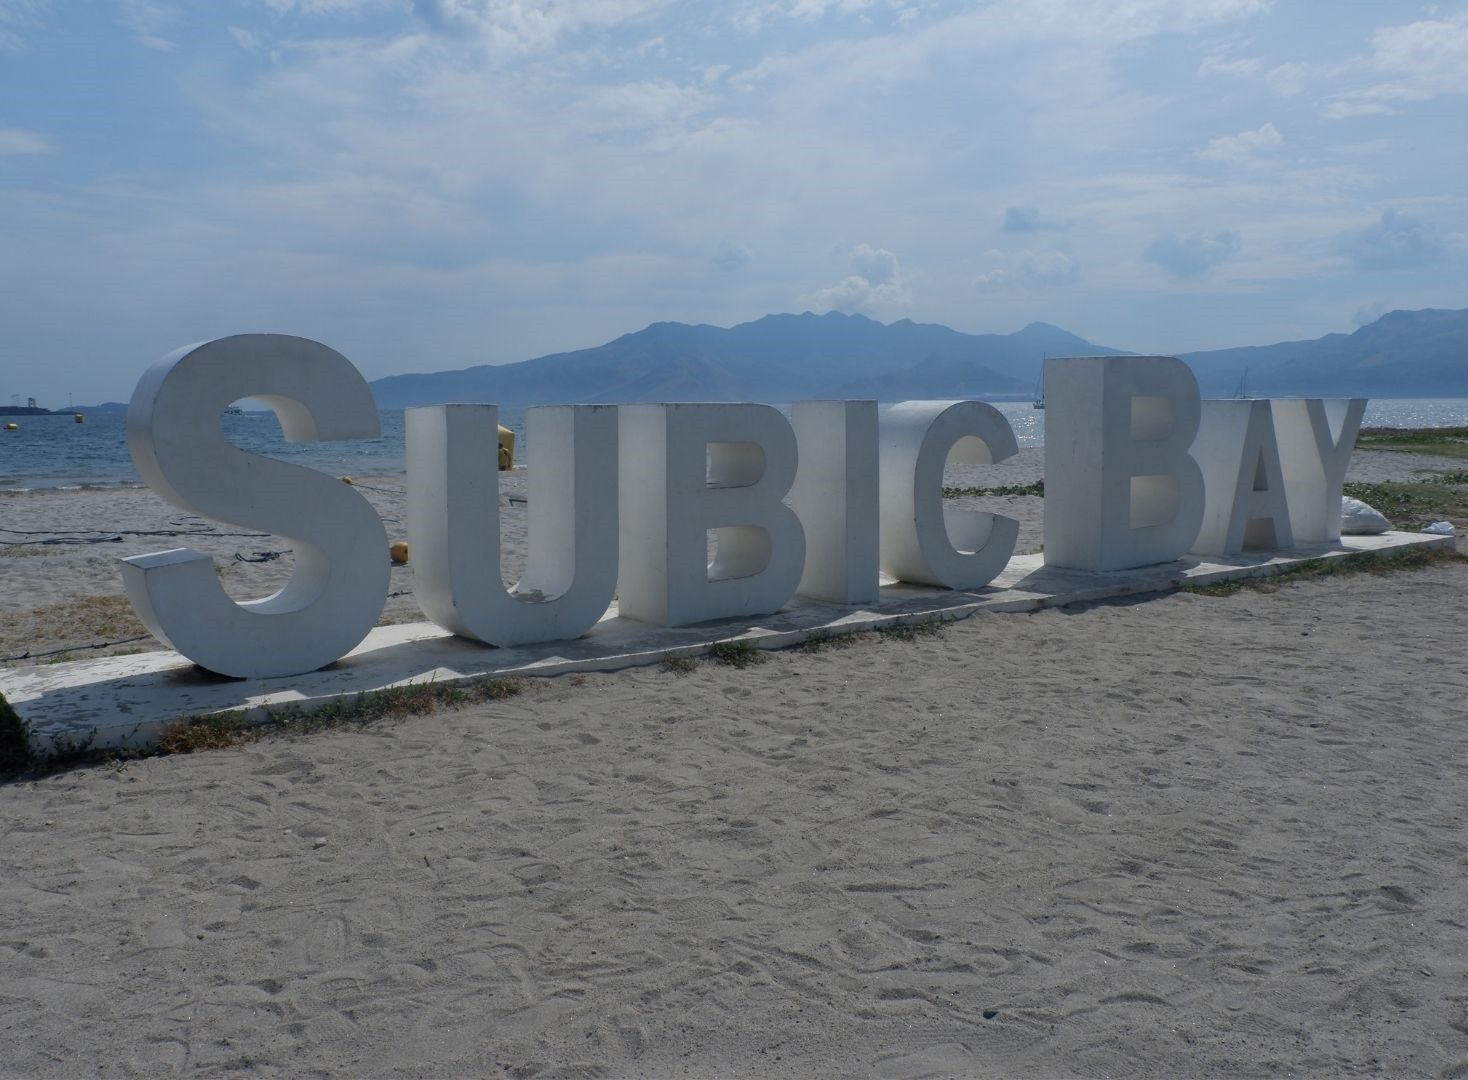 Subic sees more investment incentives under CREATE Act